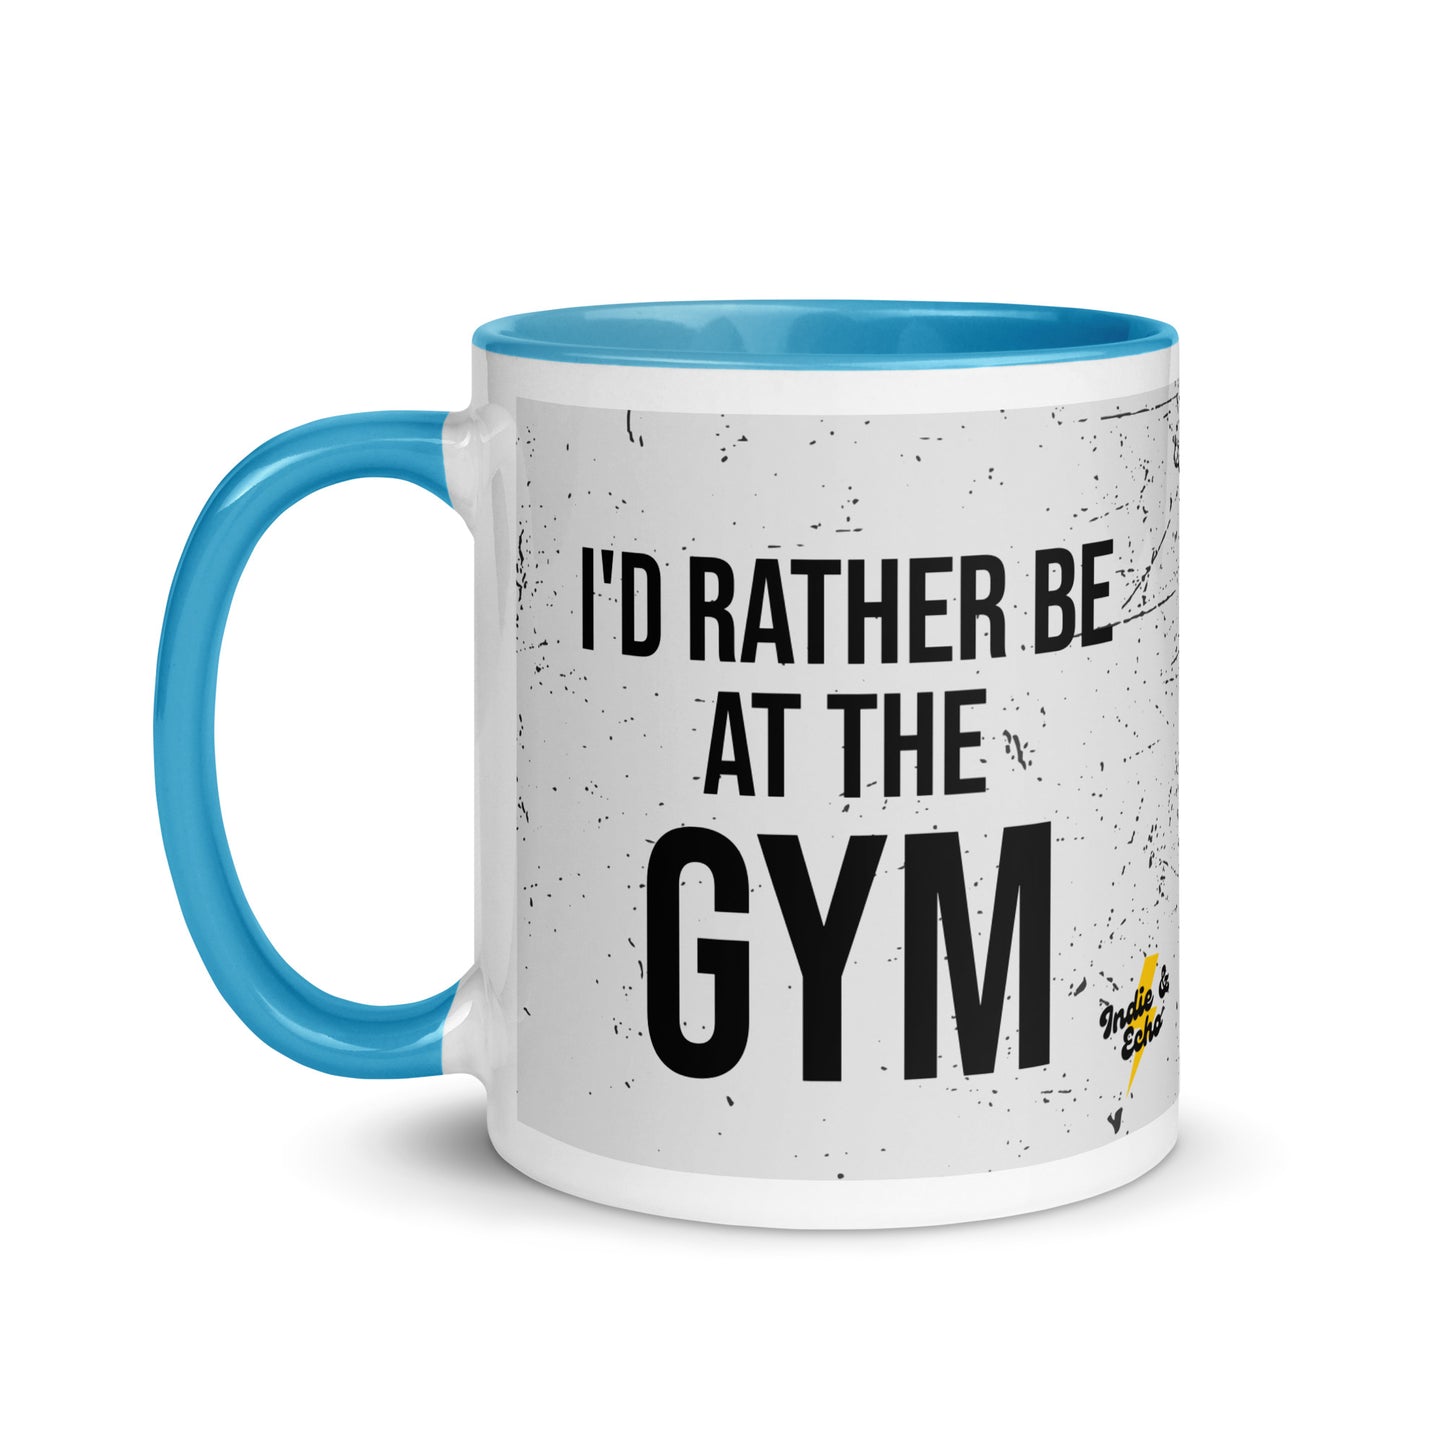 Blue handled mug with I'd rather be at the gym written on it, across a grey splatter background. A gift for someone who loves the gym.